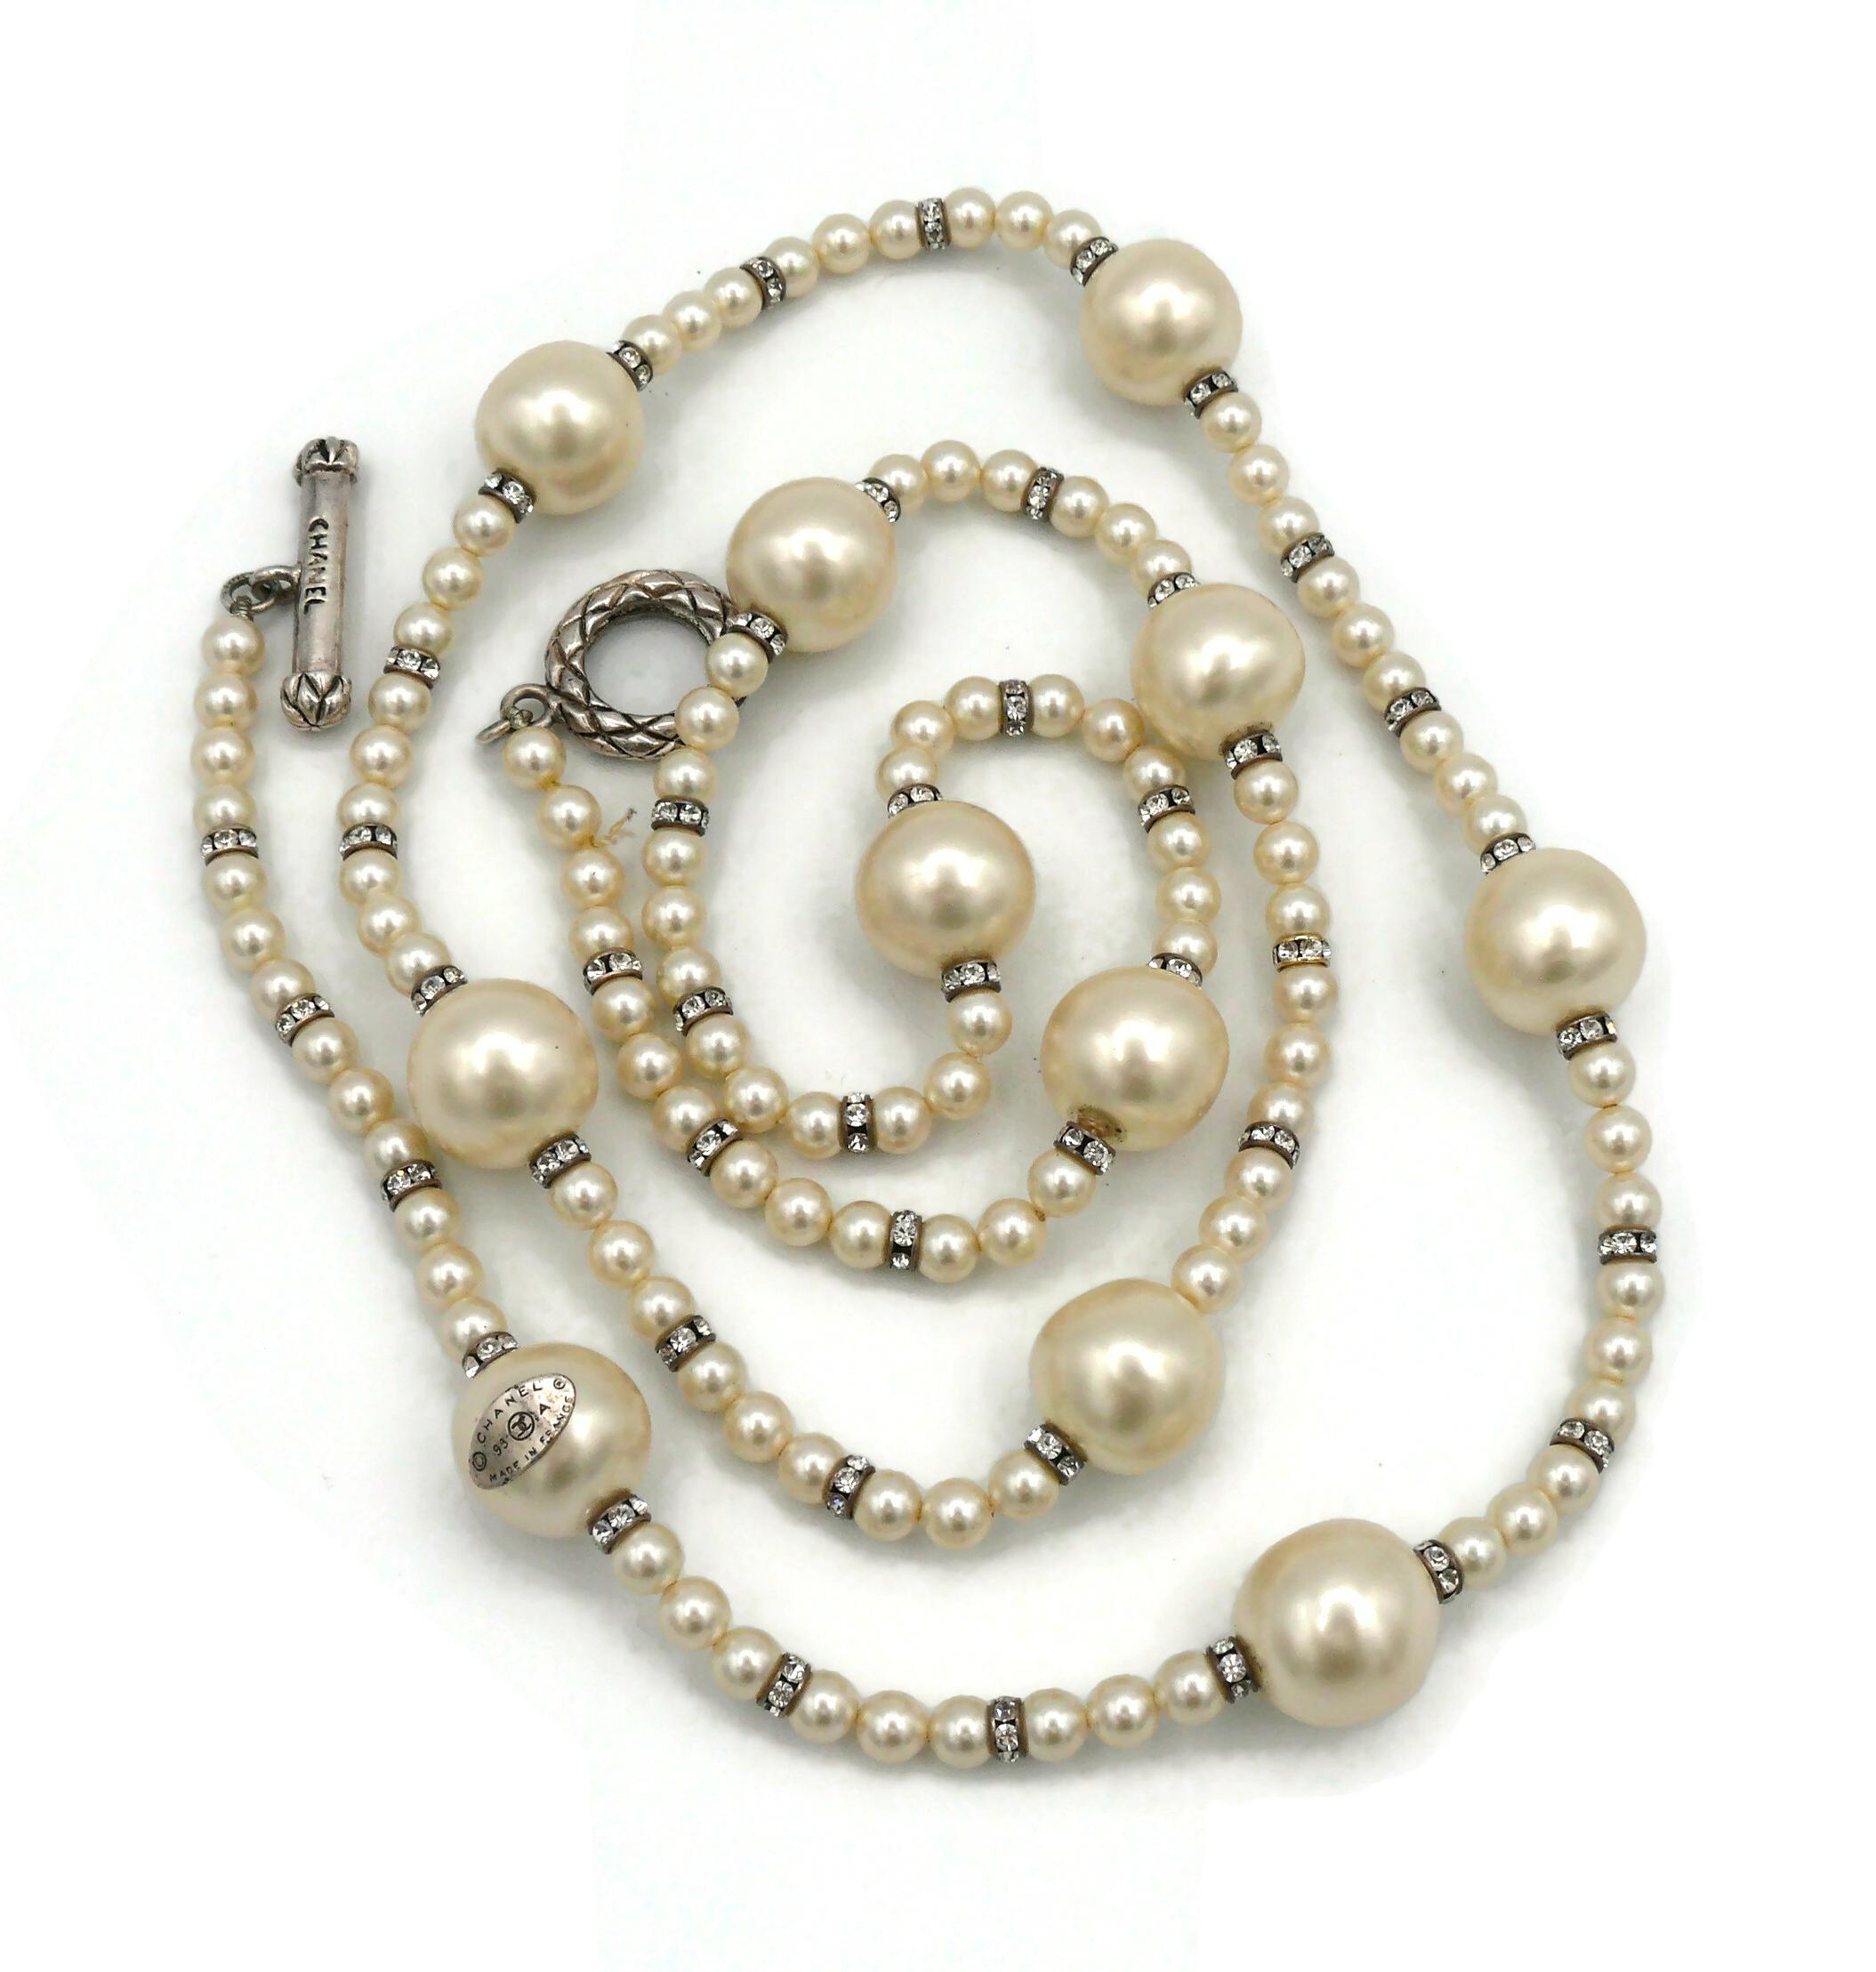 CHANEL by KARL LAGERFELD Vintage Faux Pearl and Crystal Necklace, Fall 1993 For Sale 10